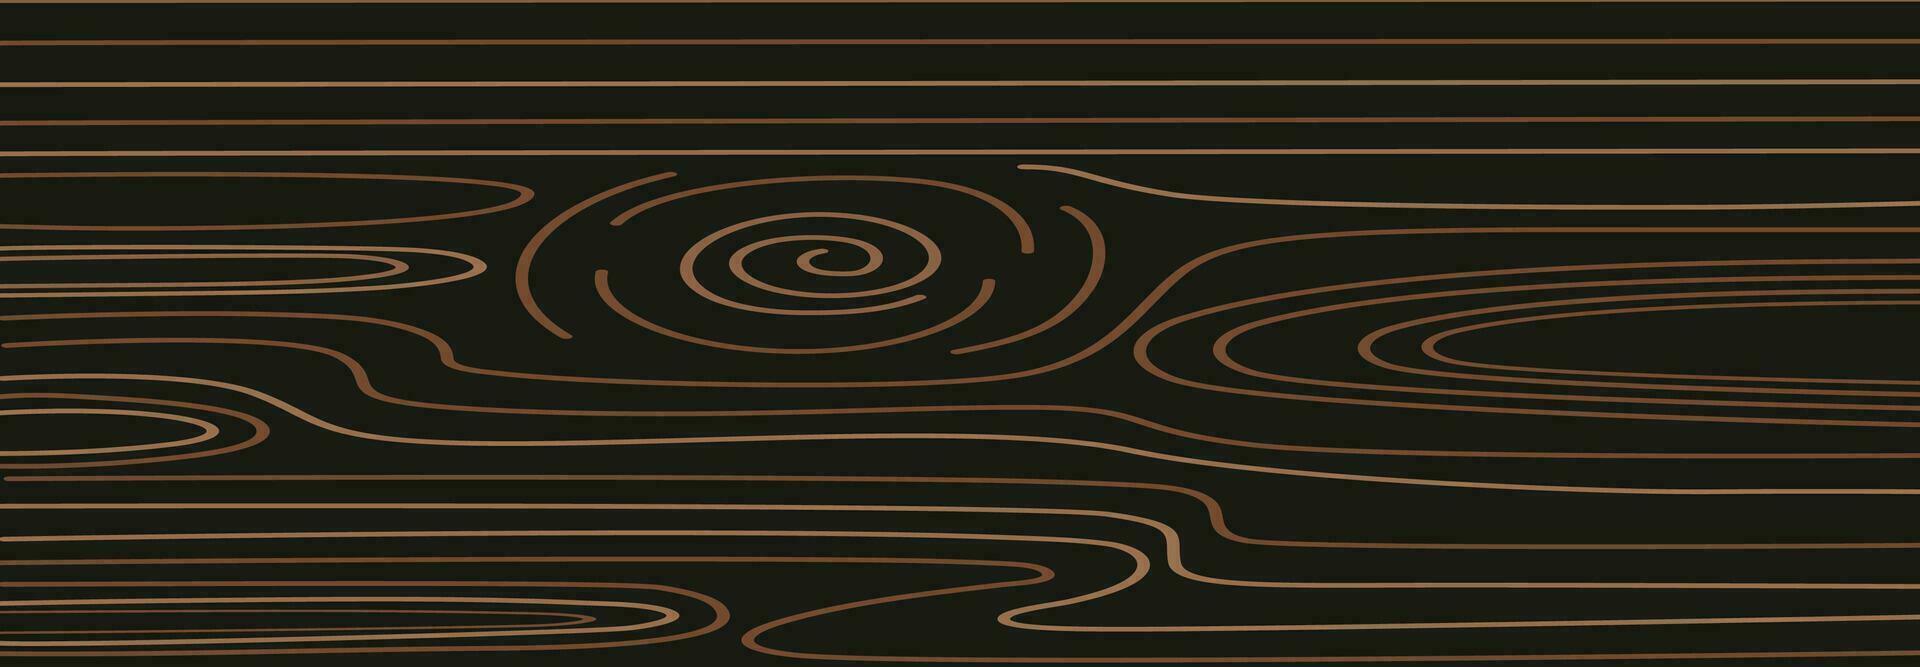 Abstract growth rings of a tree.Line design of a wooden stump. vector